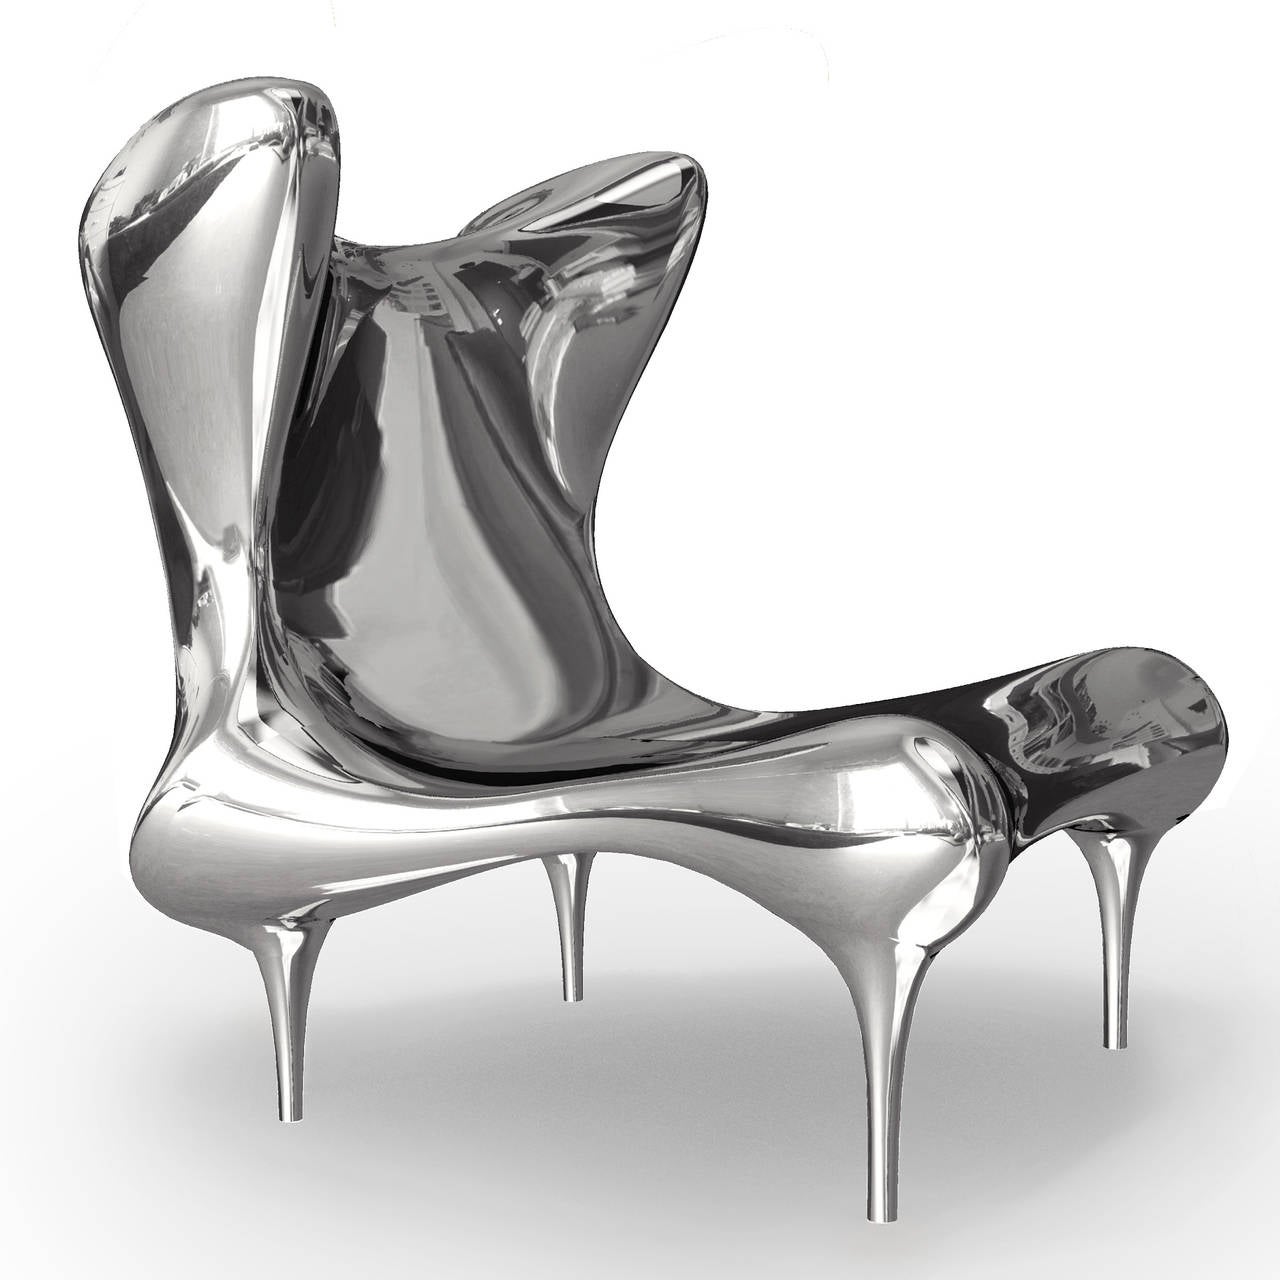 American Riemann Chair in Mirror Polished Stainless Steel For Sale